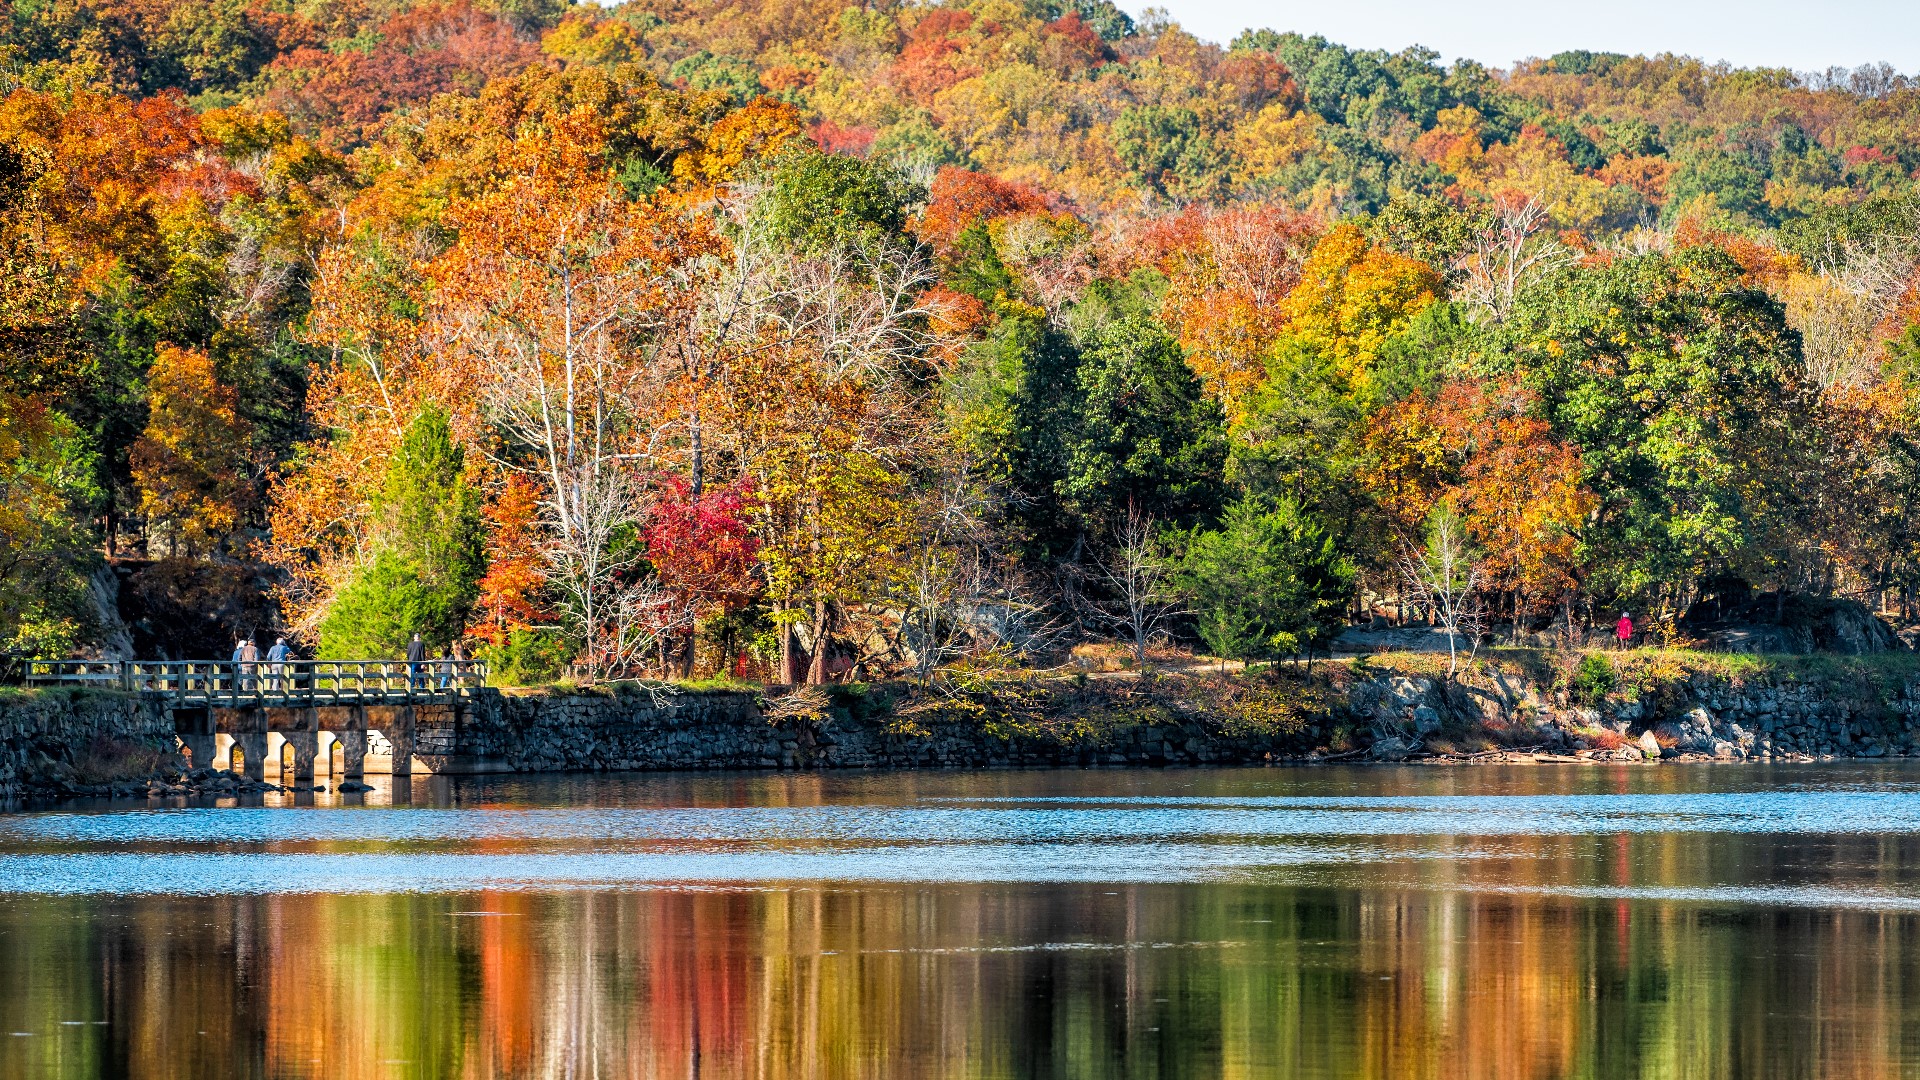 Sponsored by Visit Maryland. Claire Aubel from Visit Maryland, shares where the best places are to see the Fall foliage in the state.